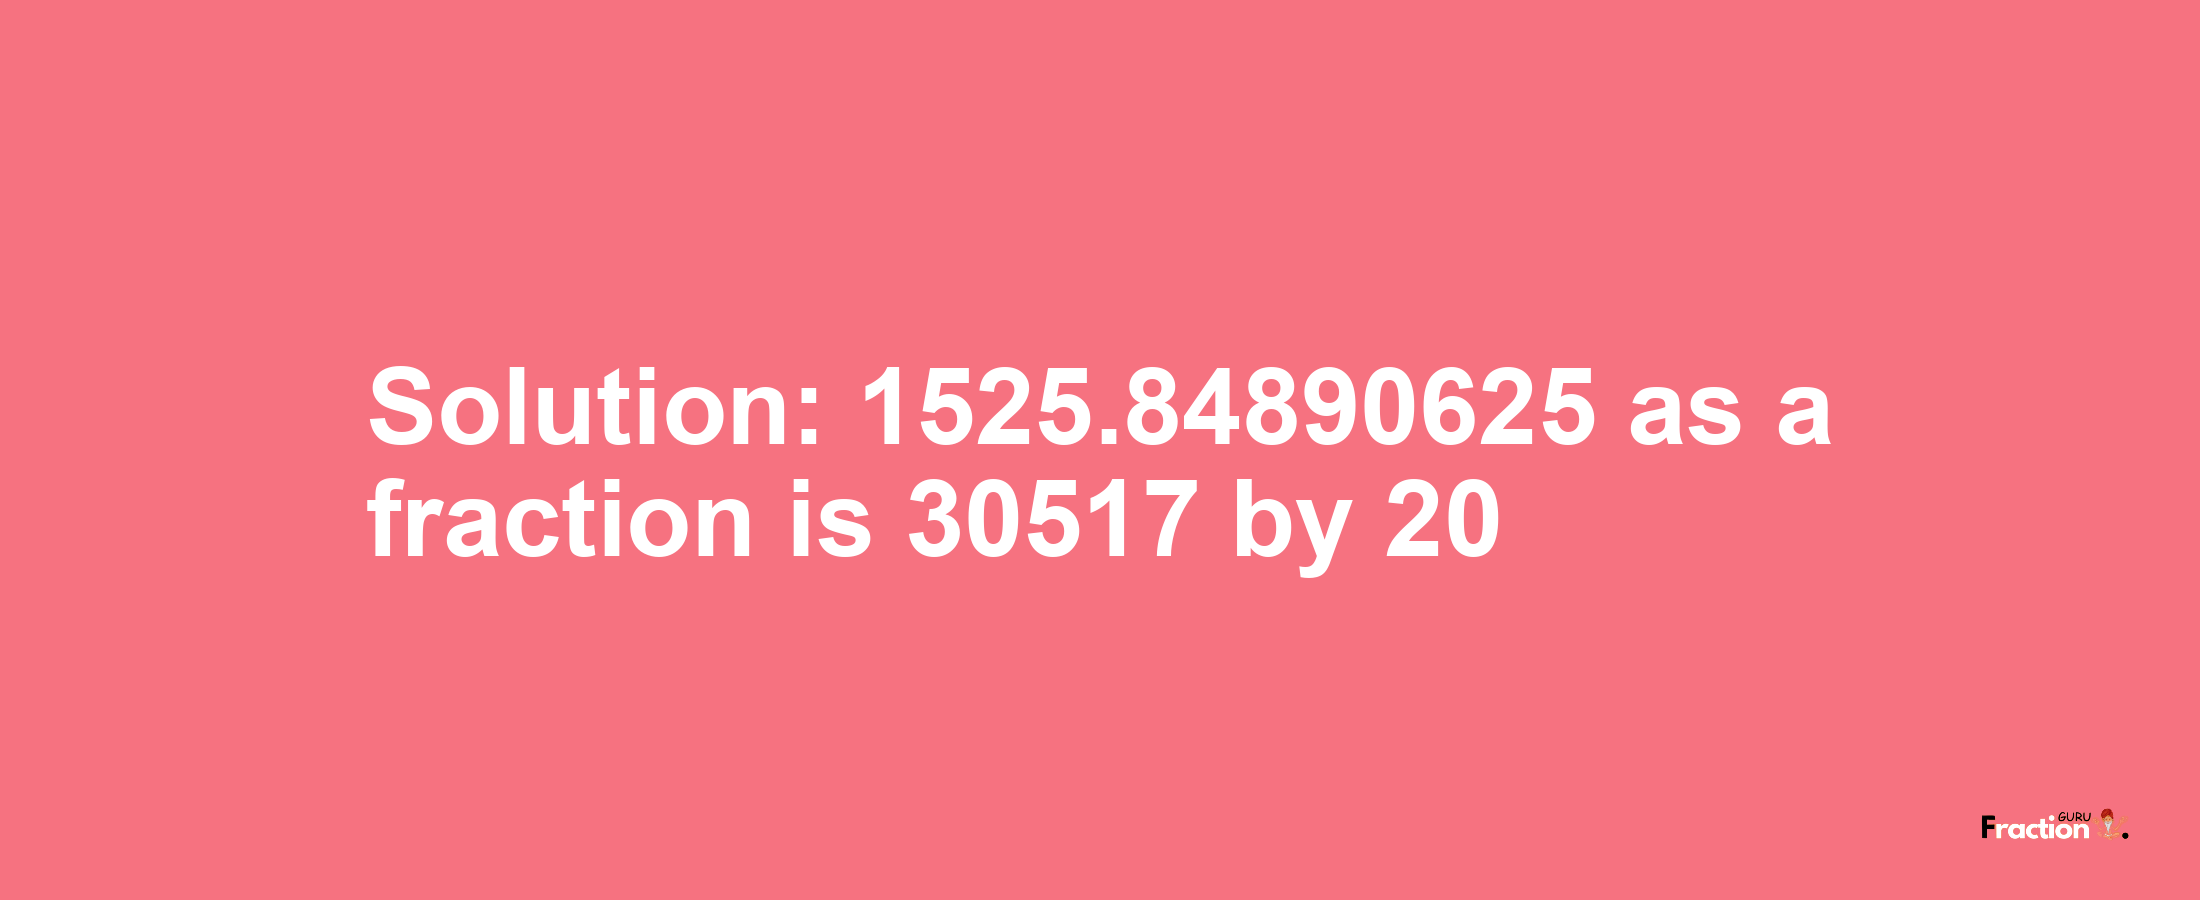 Solution:1525.84890625 as a fraction is 30517/20